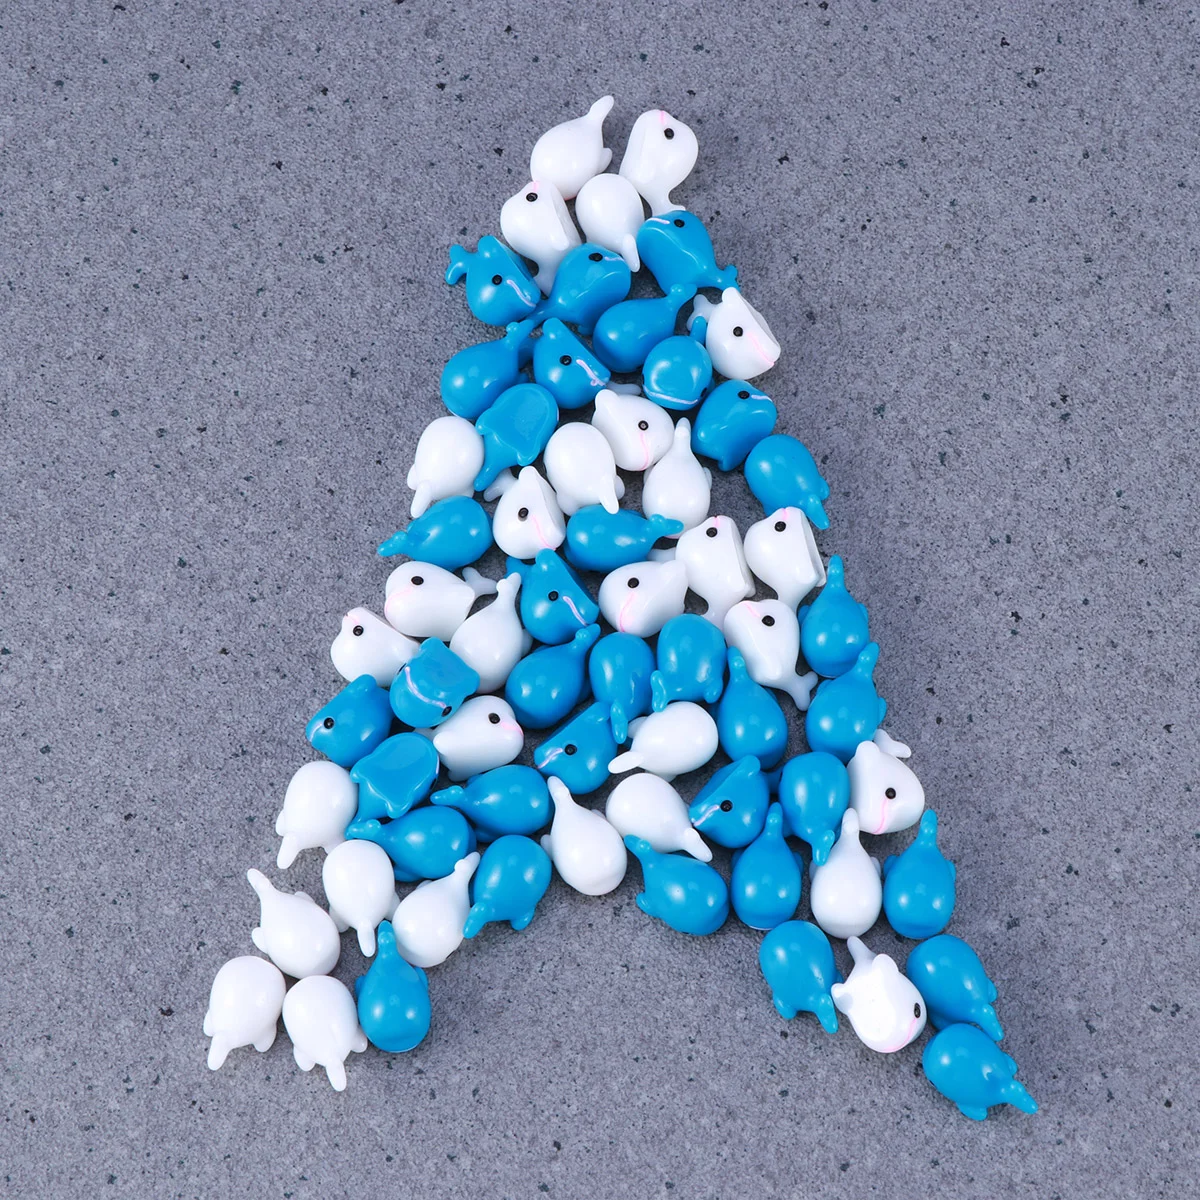 

65pcs Resin Dolphin Porpoise Sea Fish White Blue Whale Model Small Figurine Crafts Home Ornament